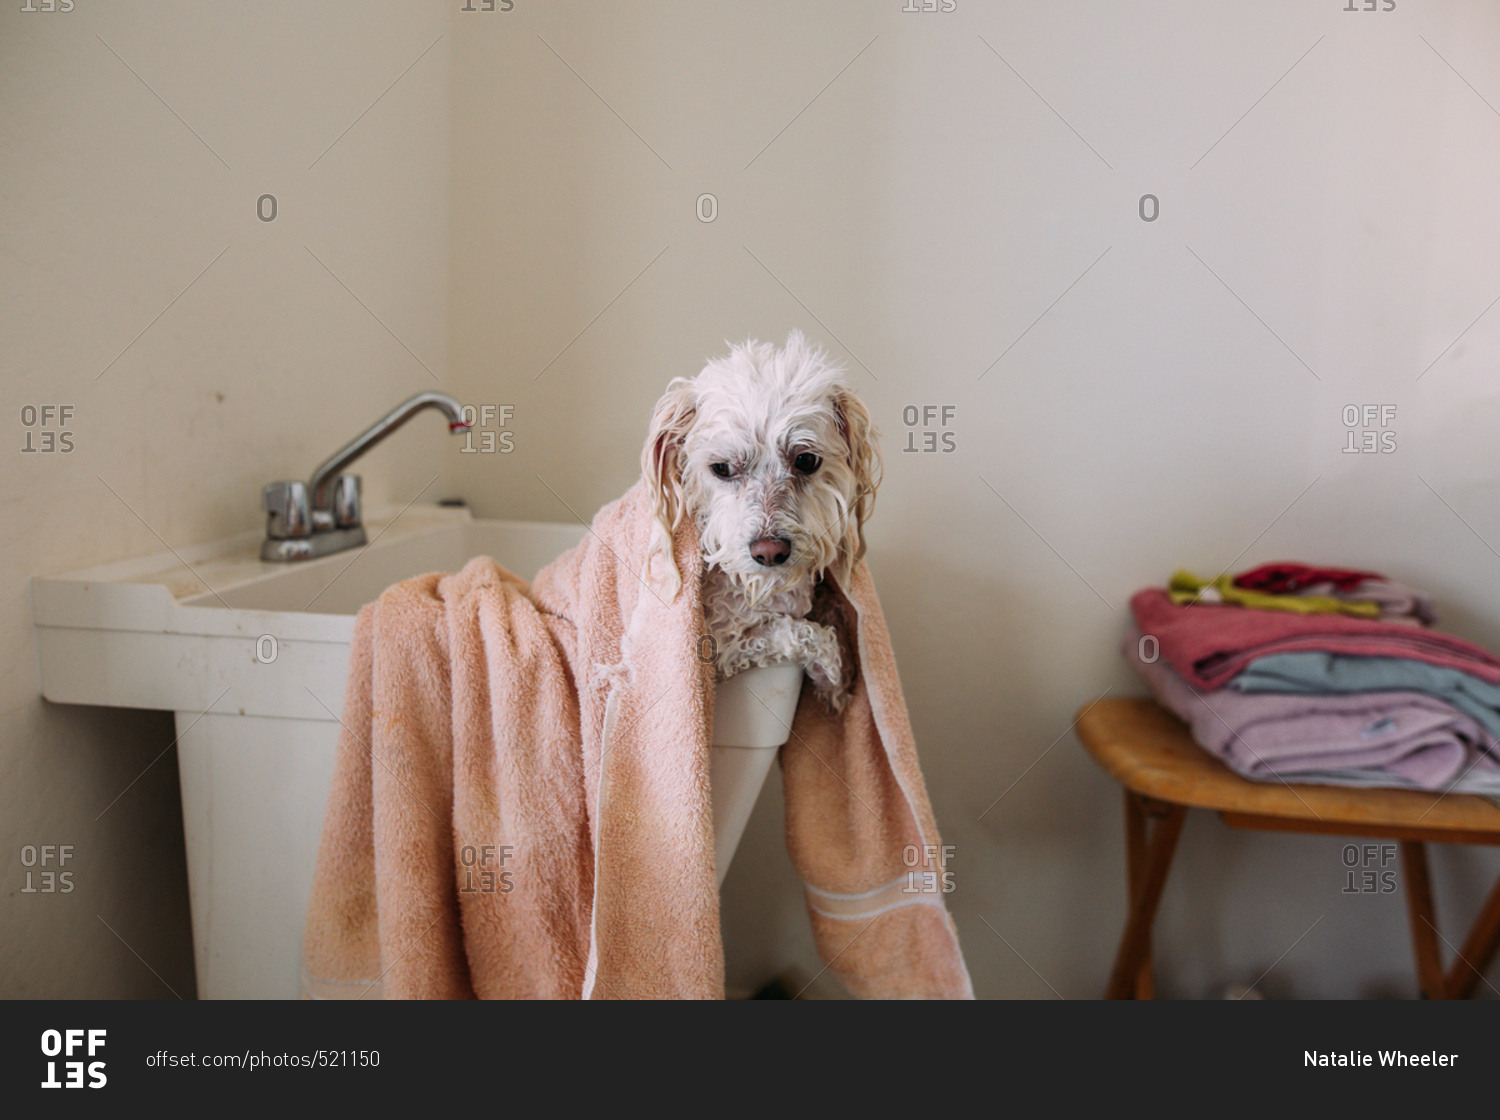 Wet dog with towel in a laundry tub